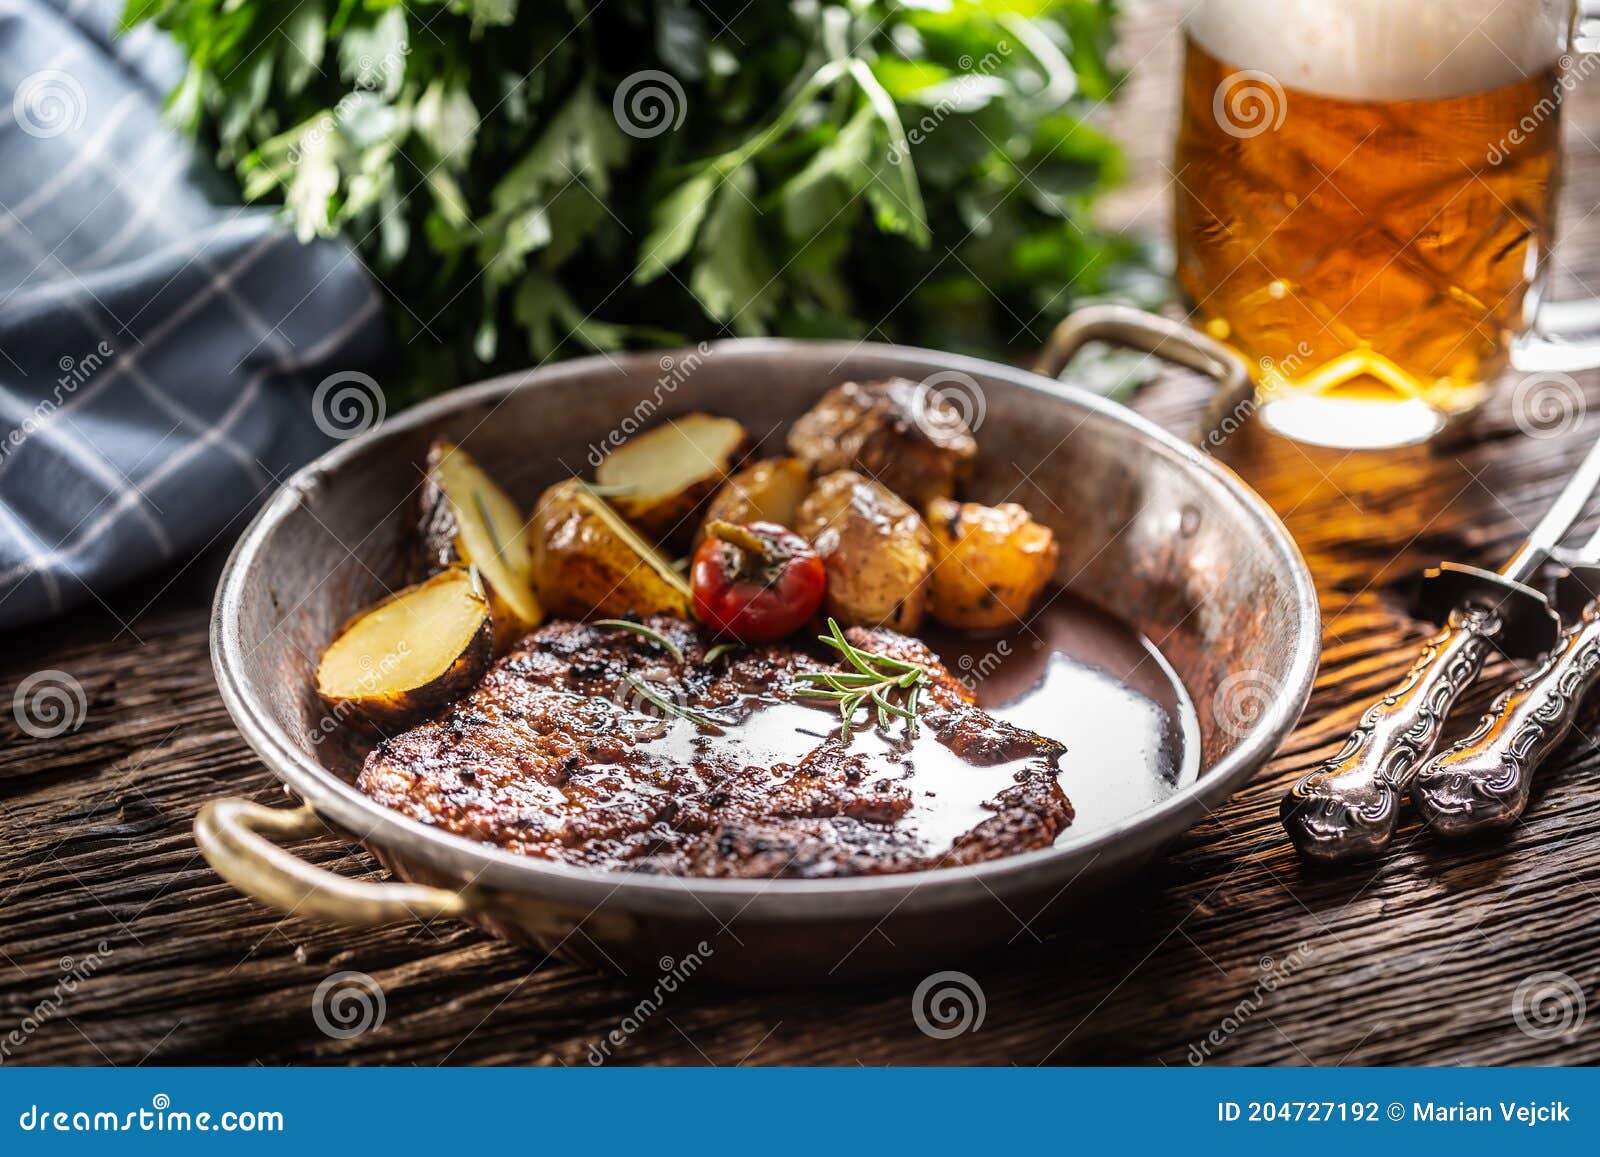 baked pork nech with potaties served in metallic vintage bowl and beer